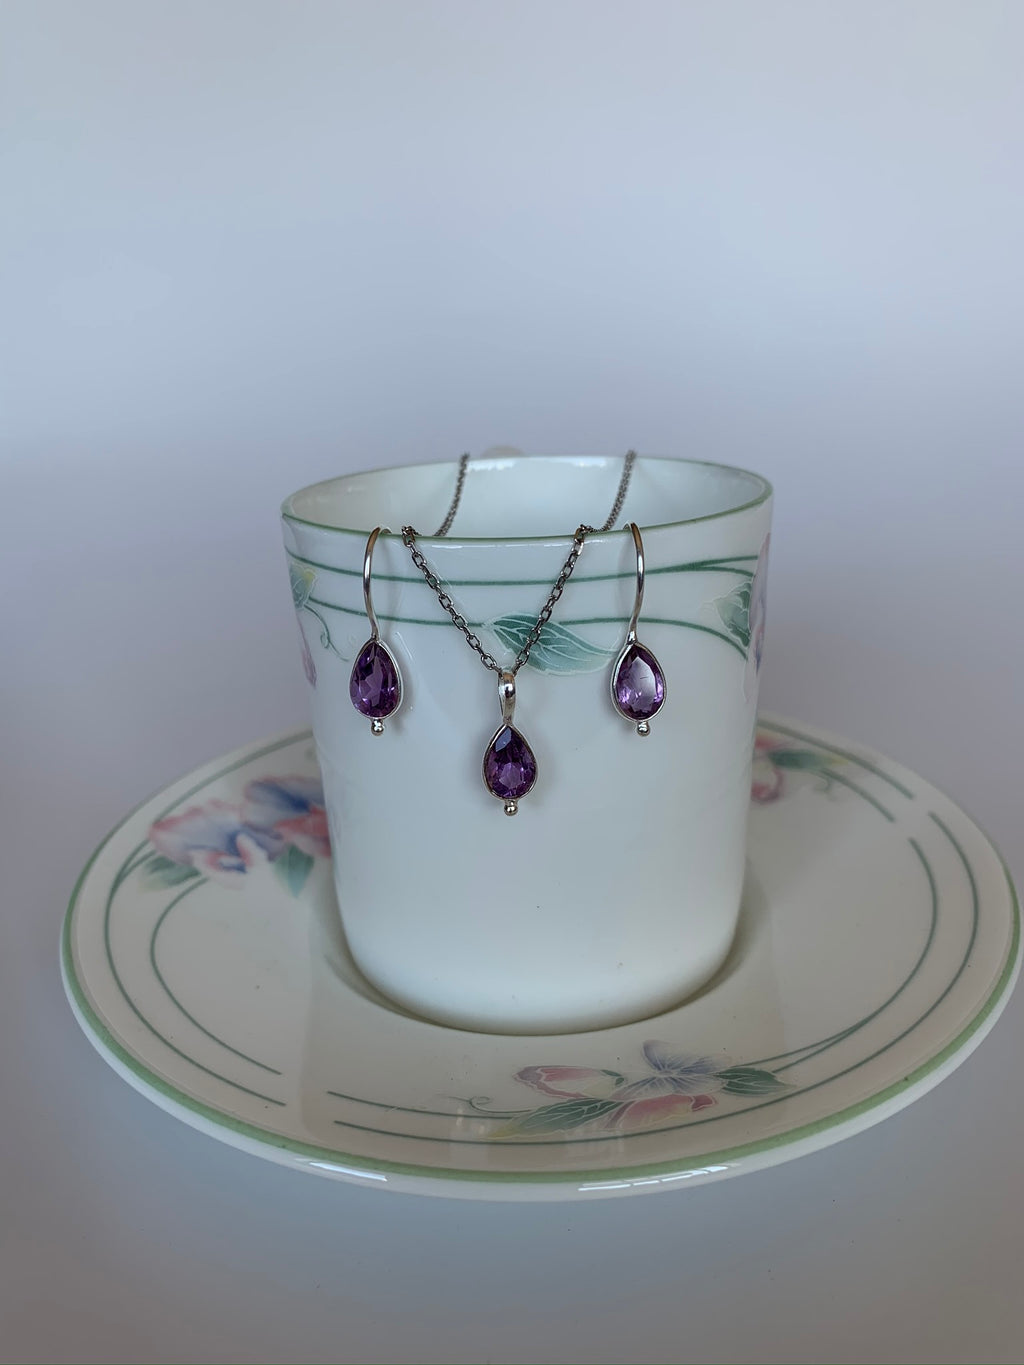 Earrings & pendant birthstone set (February). Small teardrop amethyst gemstones set in sterling silver. Earrings have wires, not posts.  Necklace chain is not included.